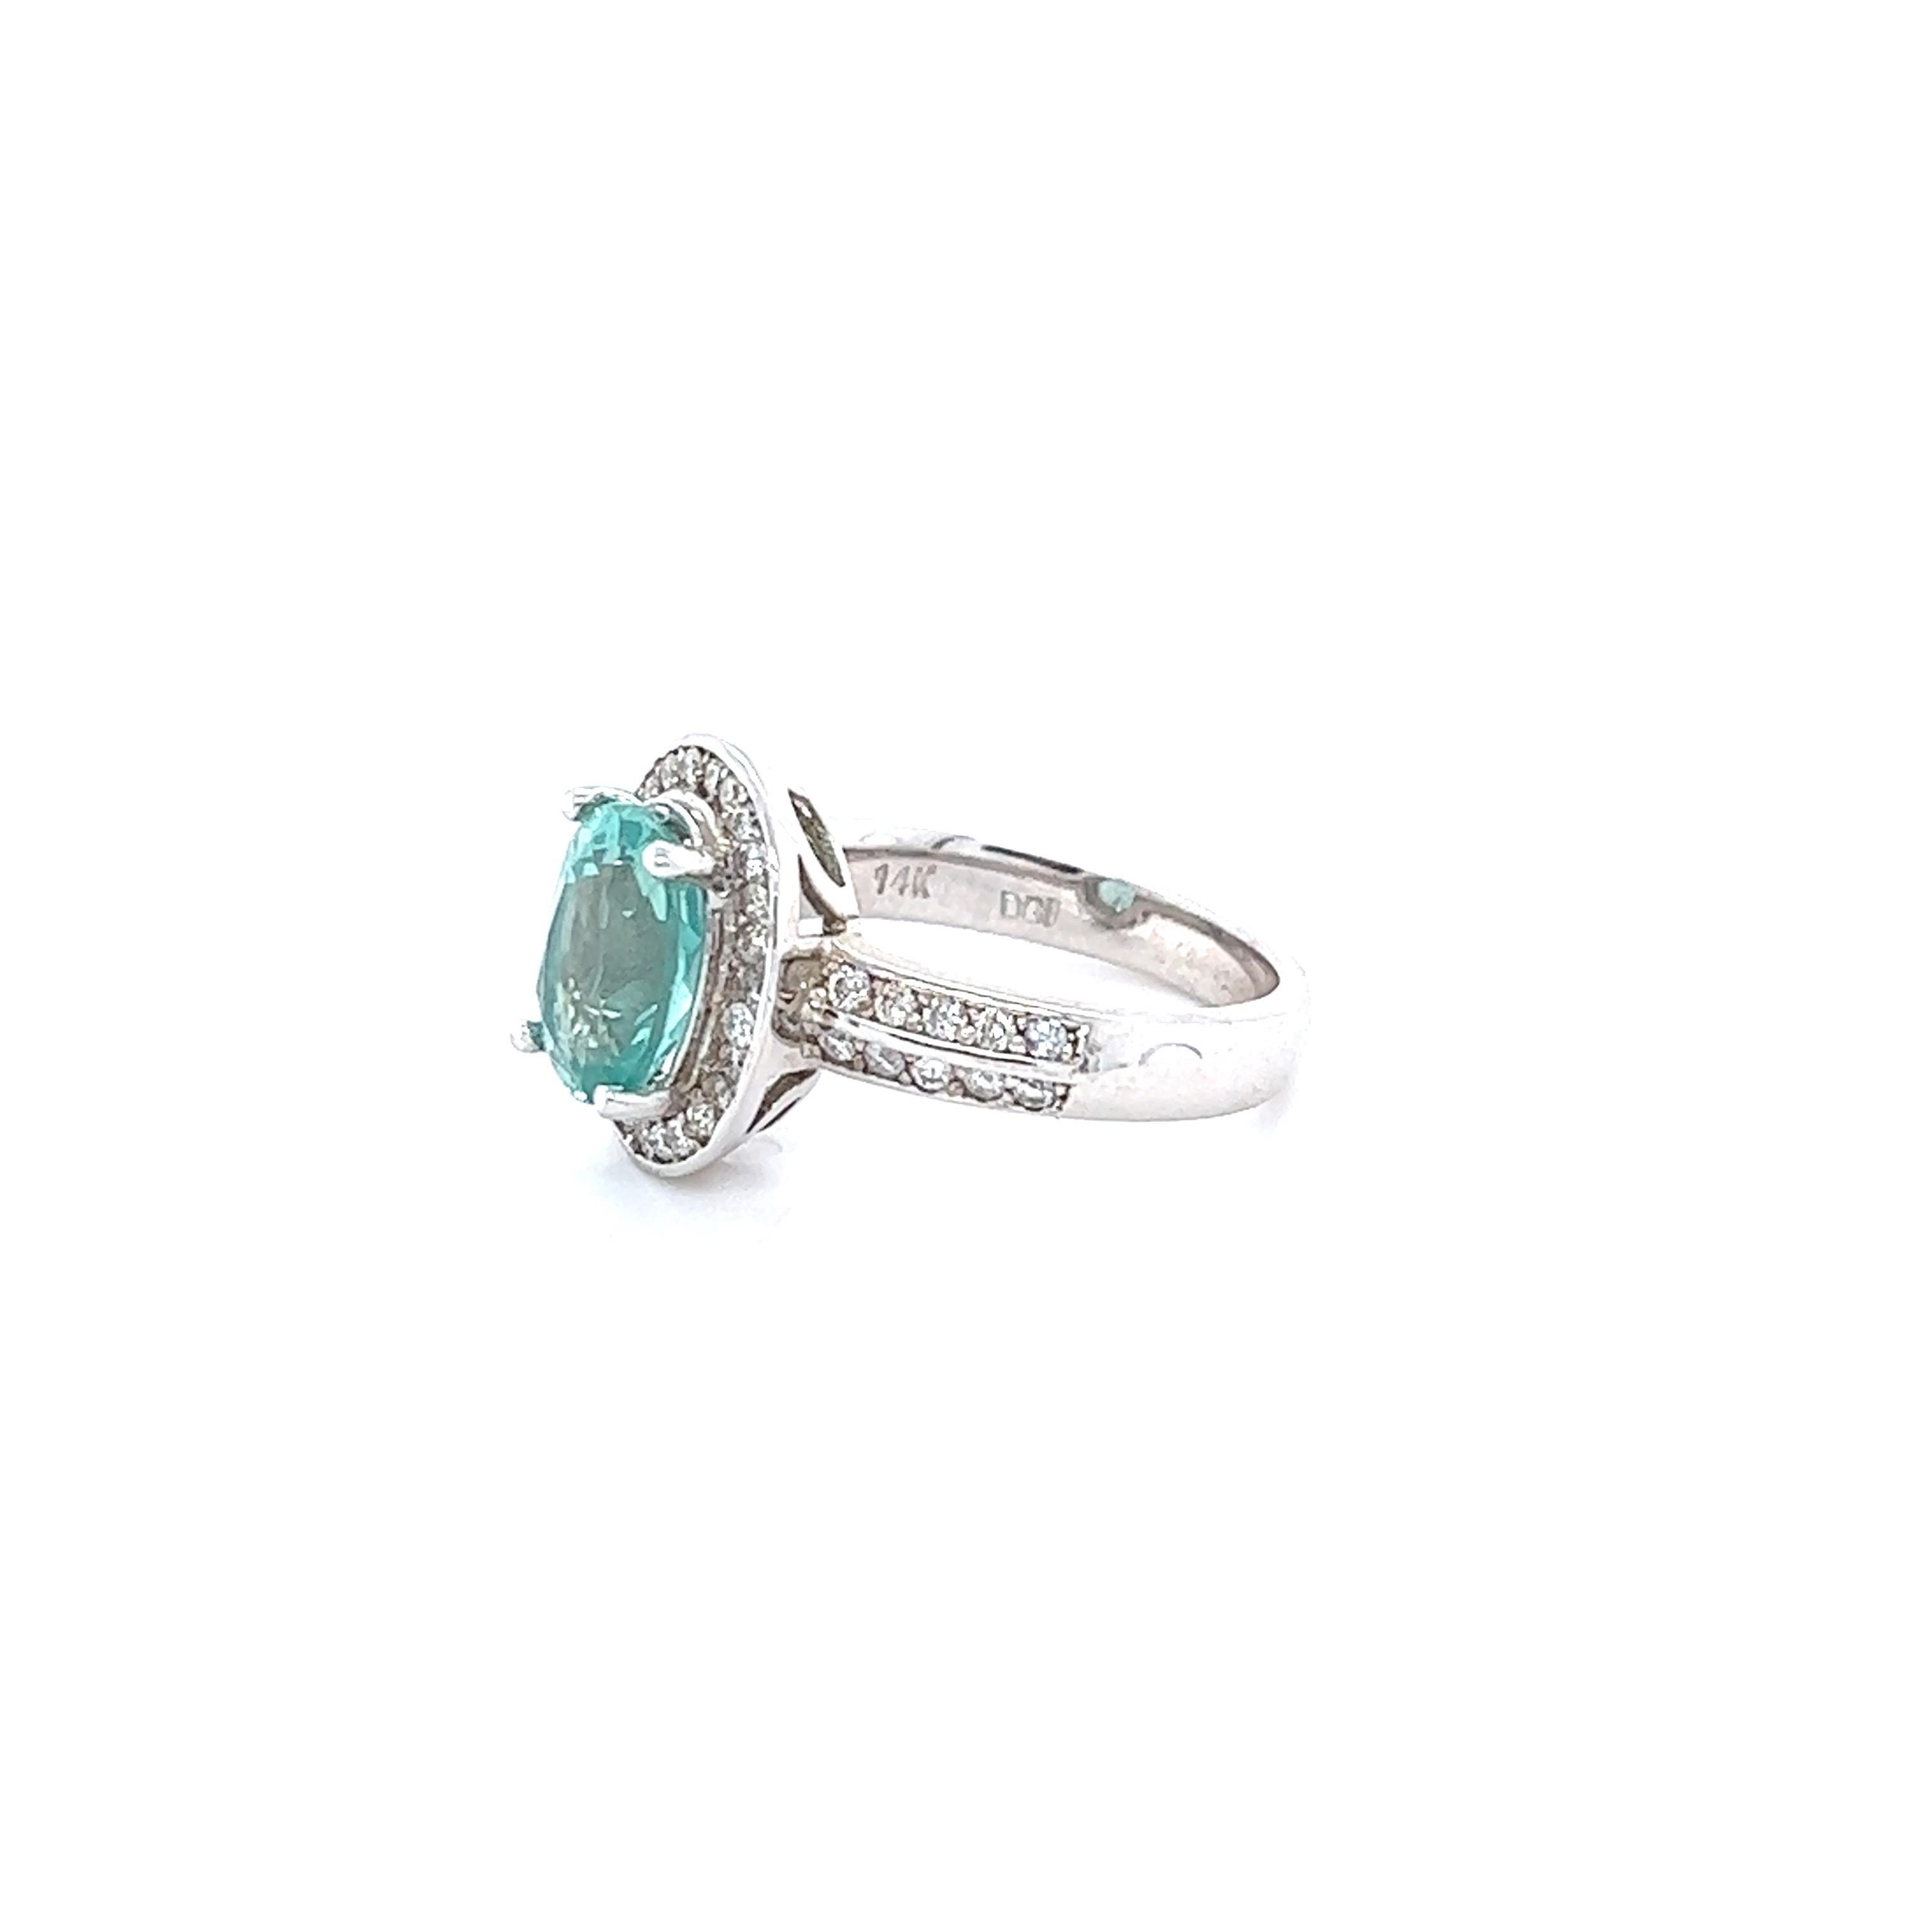 3.18 Carat Apatite Diamond Ring 14 Karat White Gold Cocktail Ring In New Condition For Sale In Los Angeles, CA